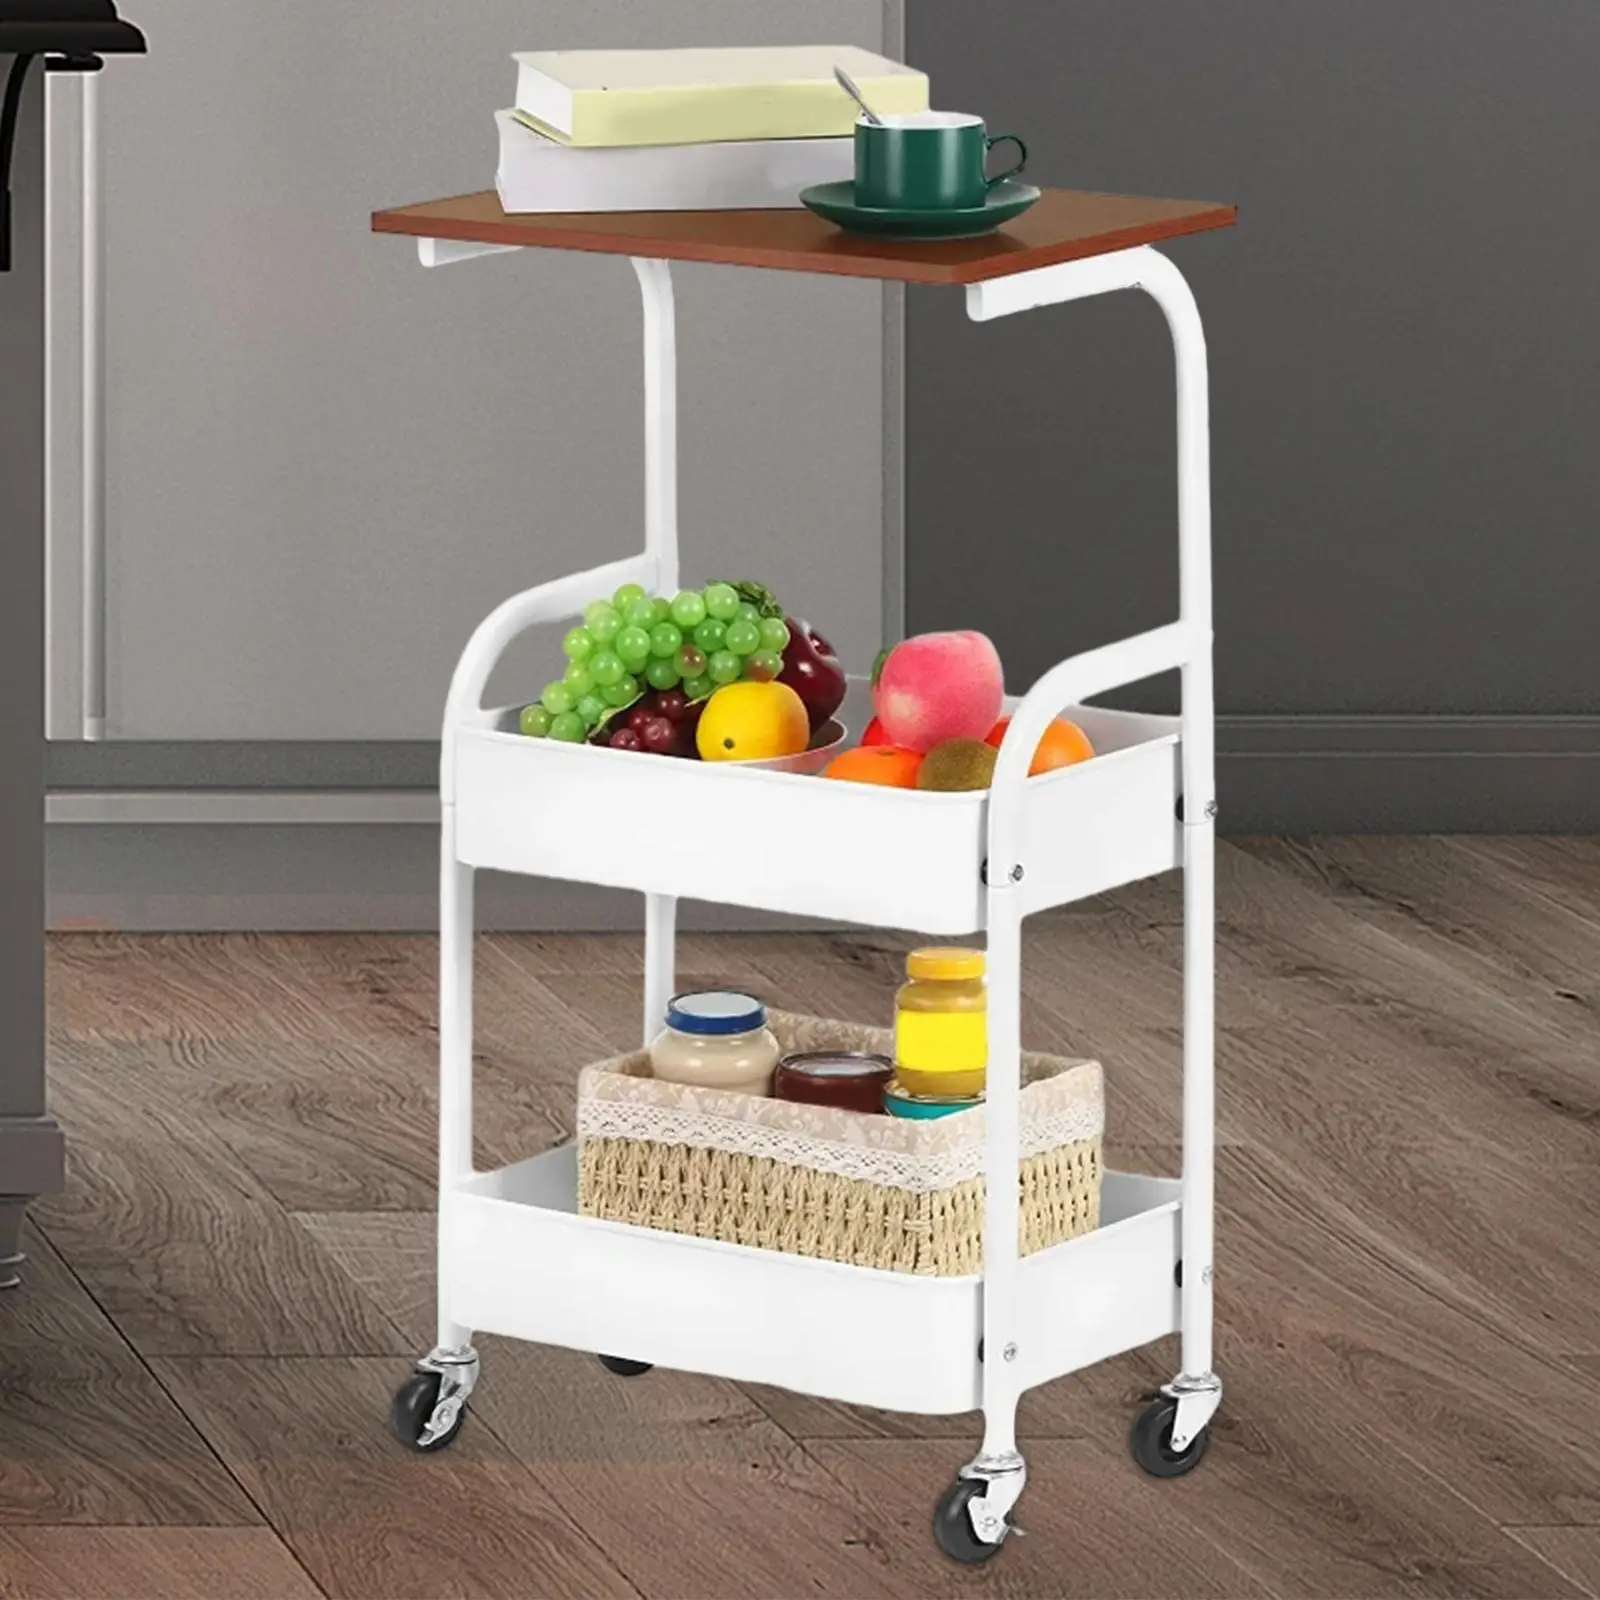 3 Tier Slim Storage Cart Fruits Holder Rustproof Slide Out Organizer Cart for Kitchen Office Bathroom Laundry Room Narrow Place